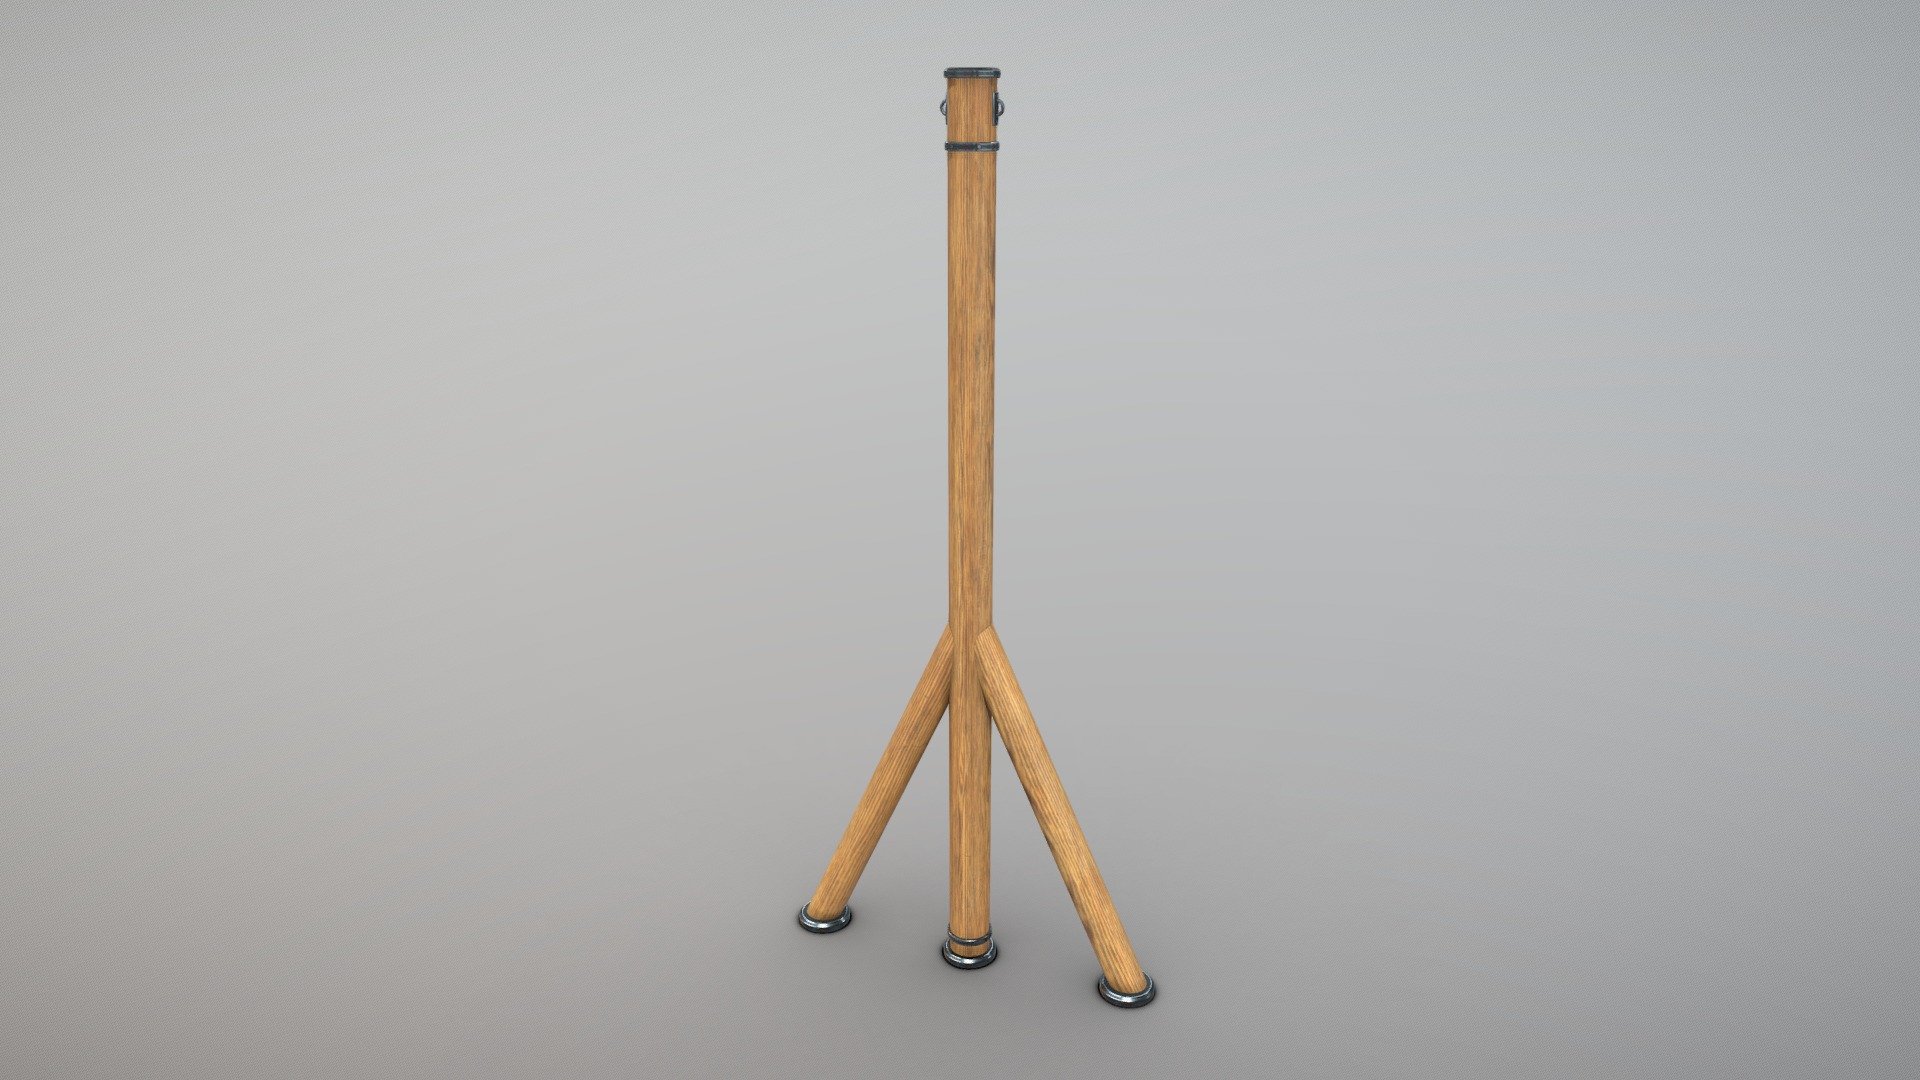 Chaining Pole

I made it in Blender 3.0 and textured it in Substance Painter. 

2 x 2k material slots - Chaining Pole - 3D model by wlodarski3d 3d model